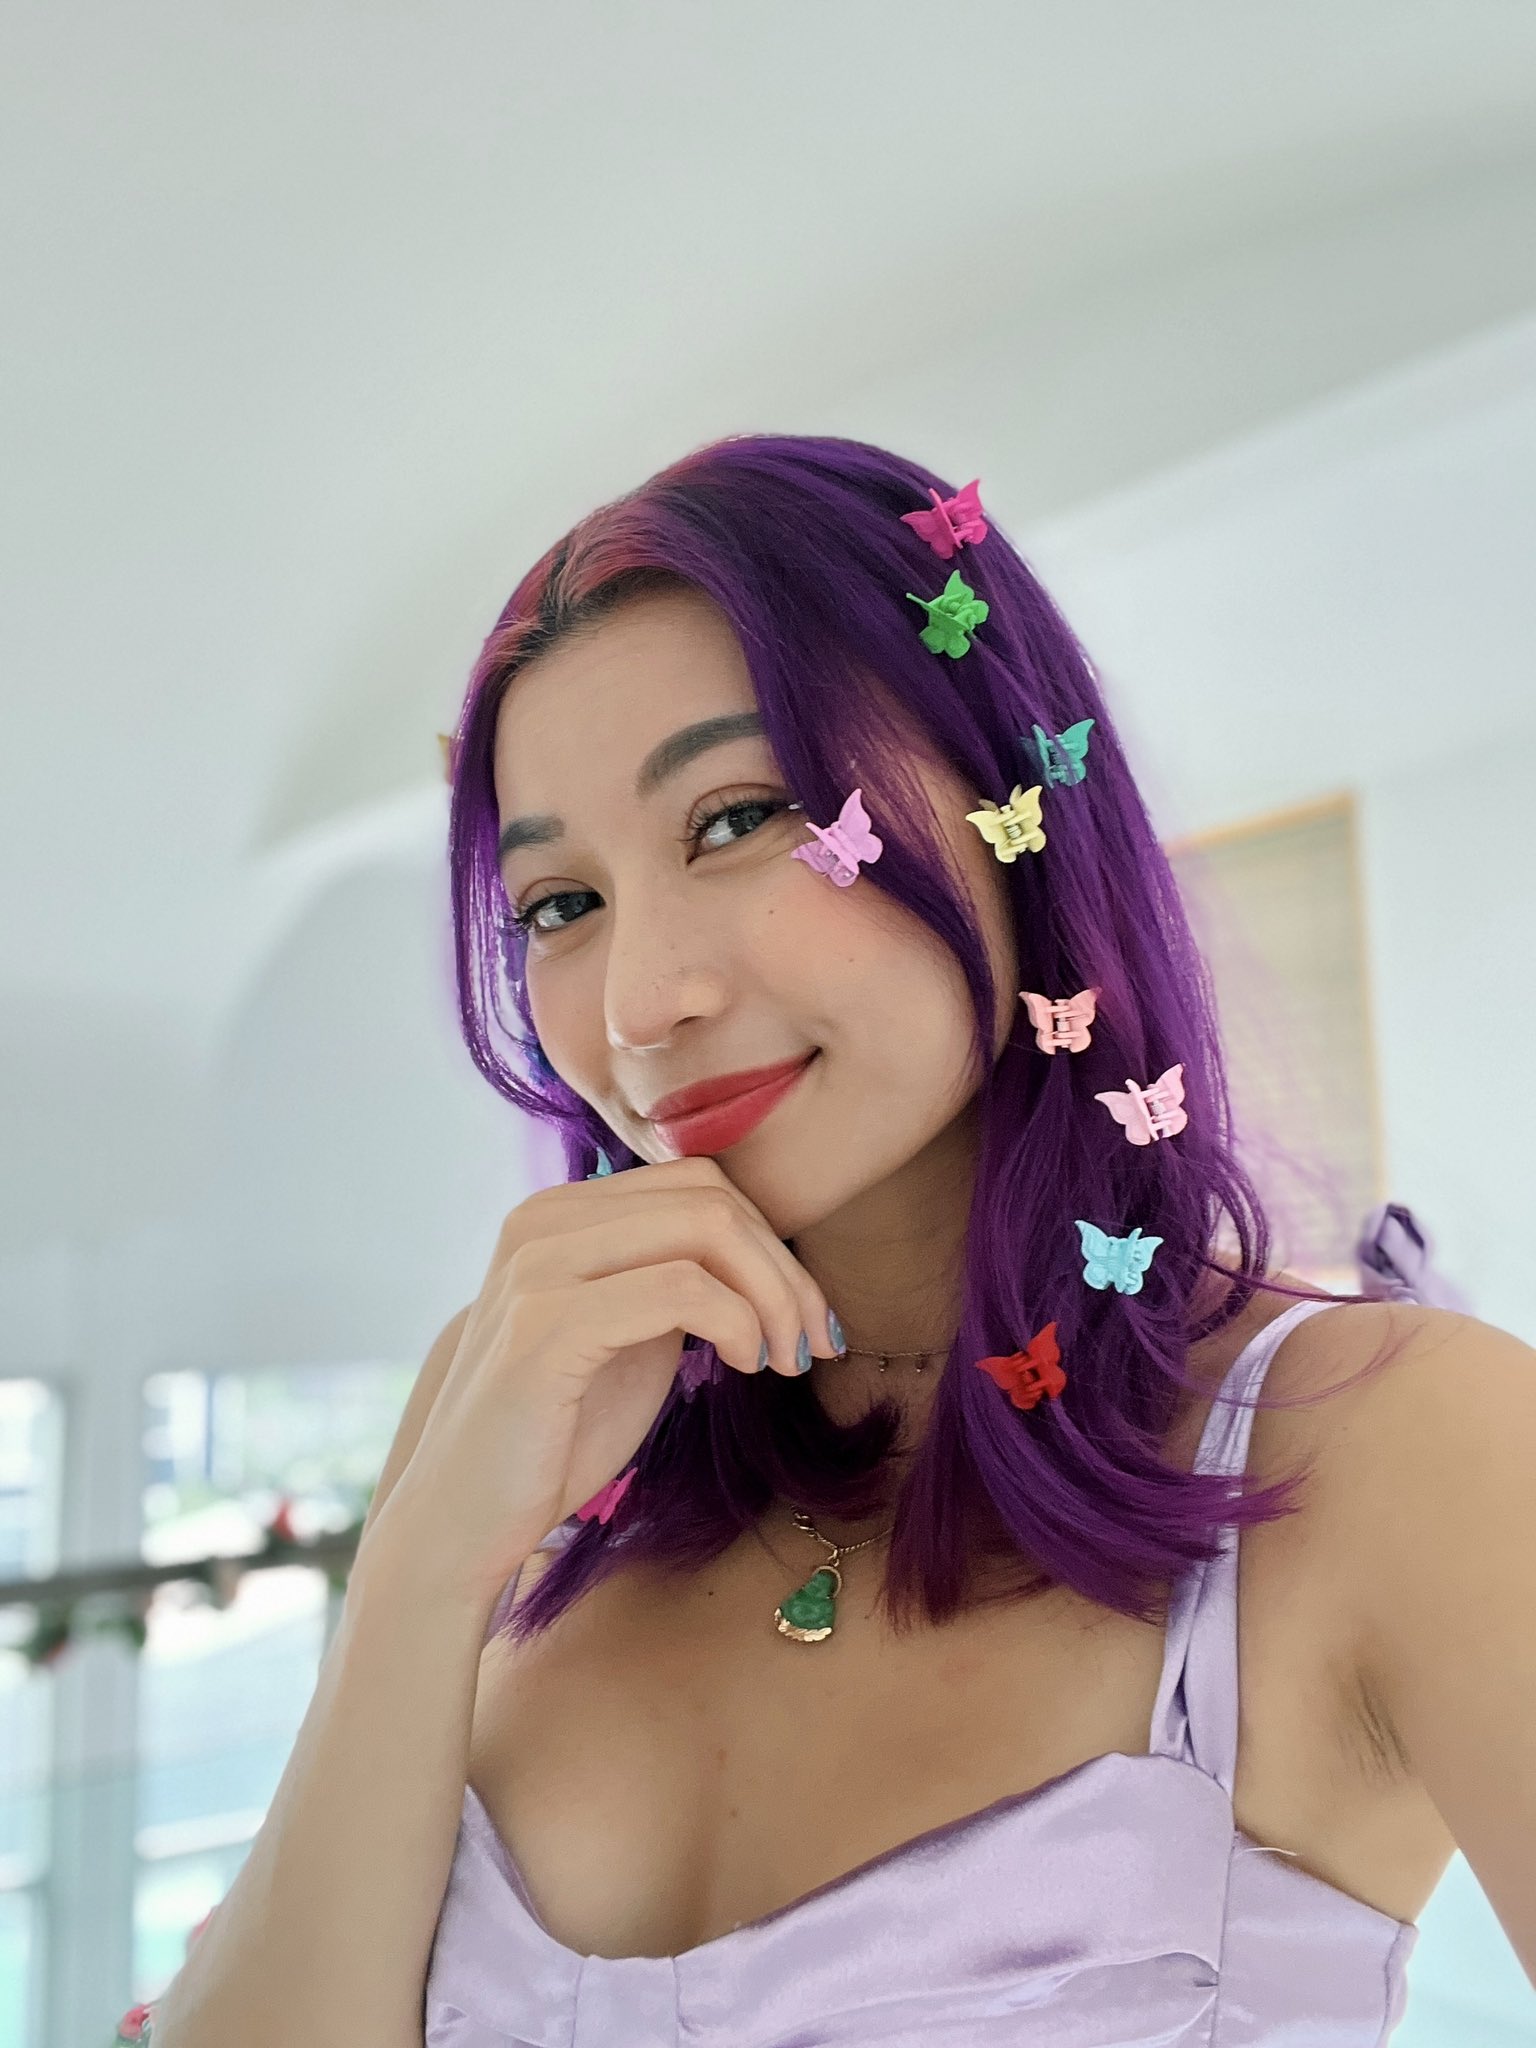 Jasminericegirl 🍚 On Twitter What Has Purple Hair And Can Make You